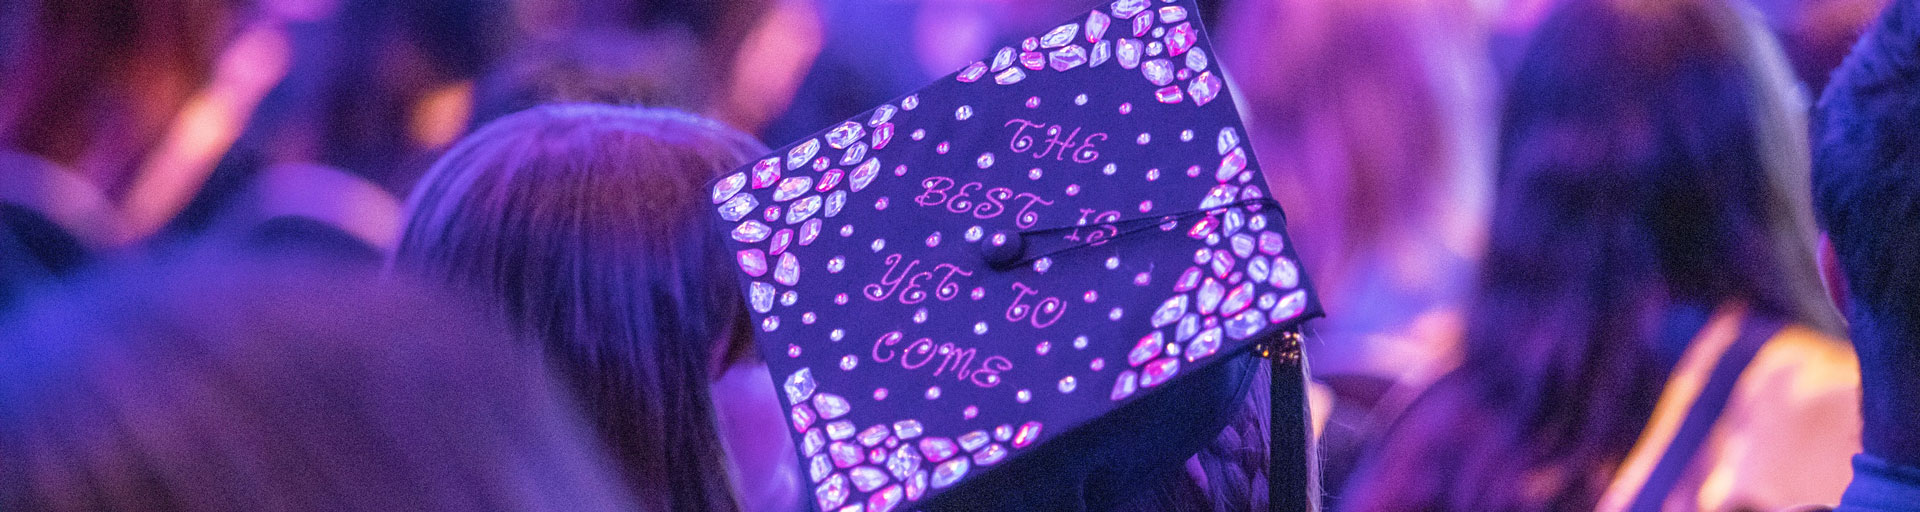 person wearing graduation cap that reads: the best is yet to come